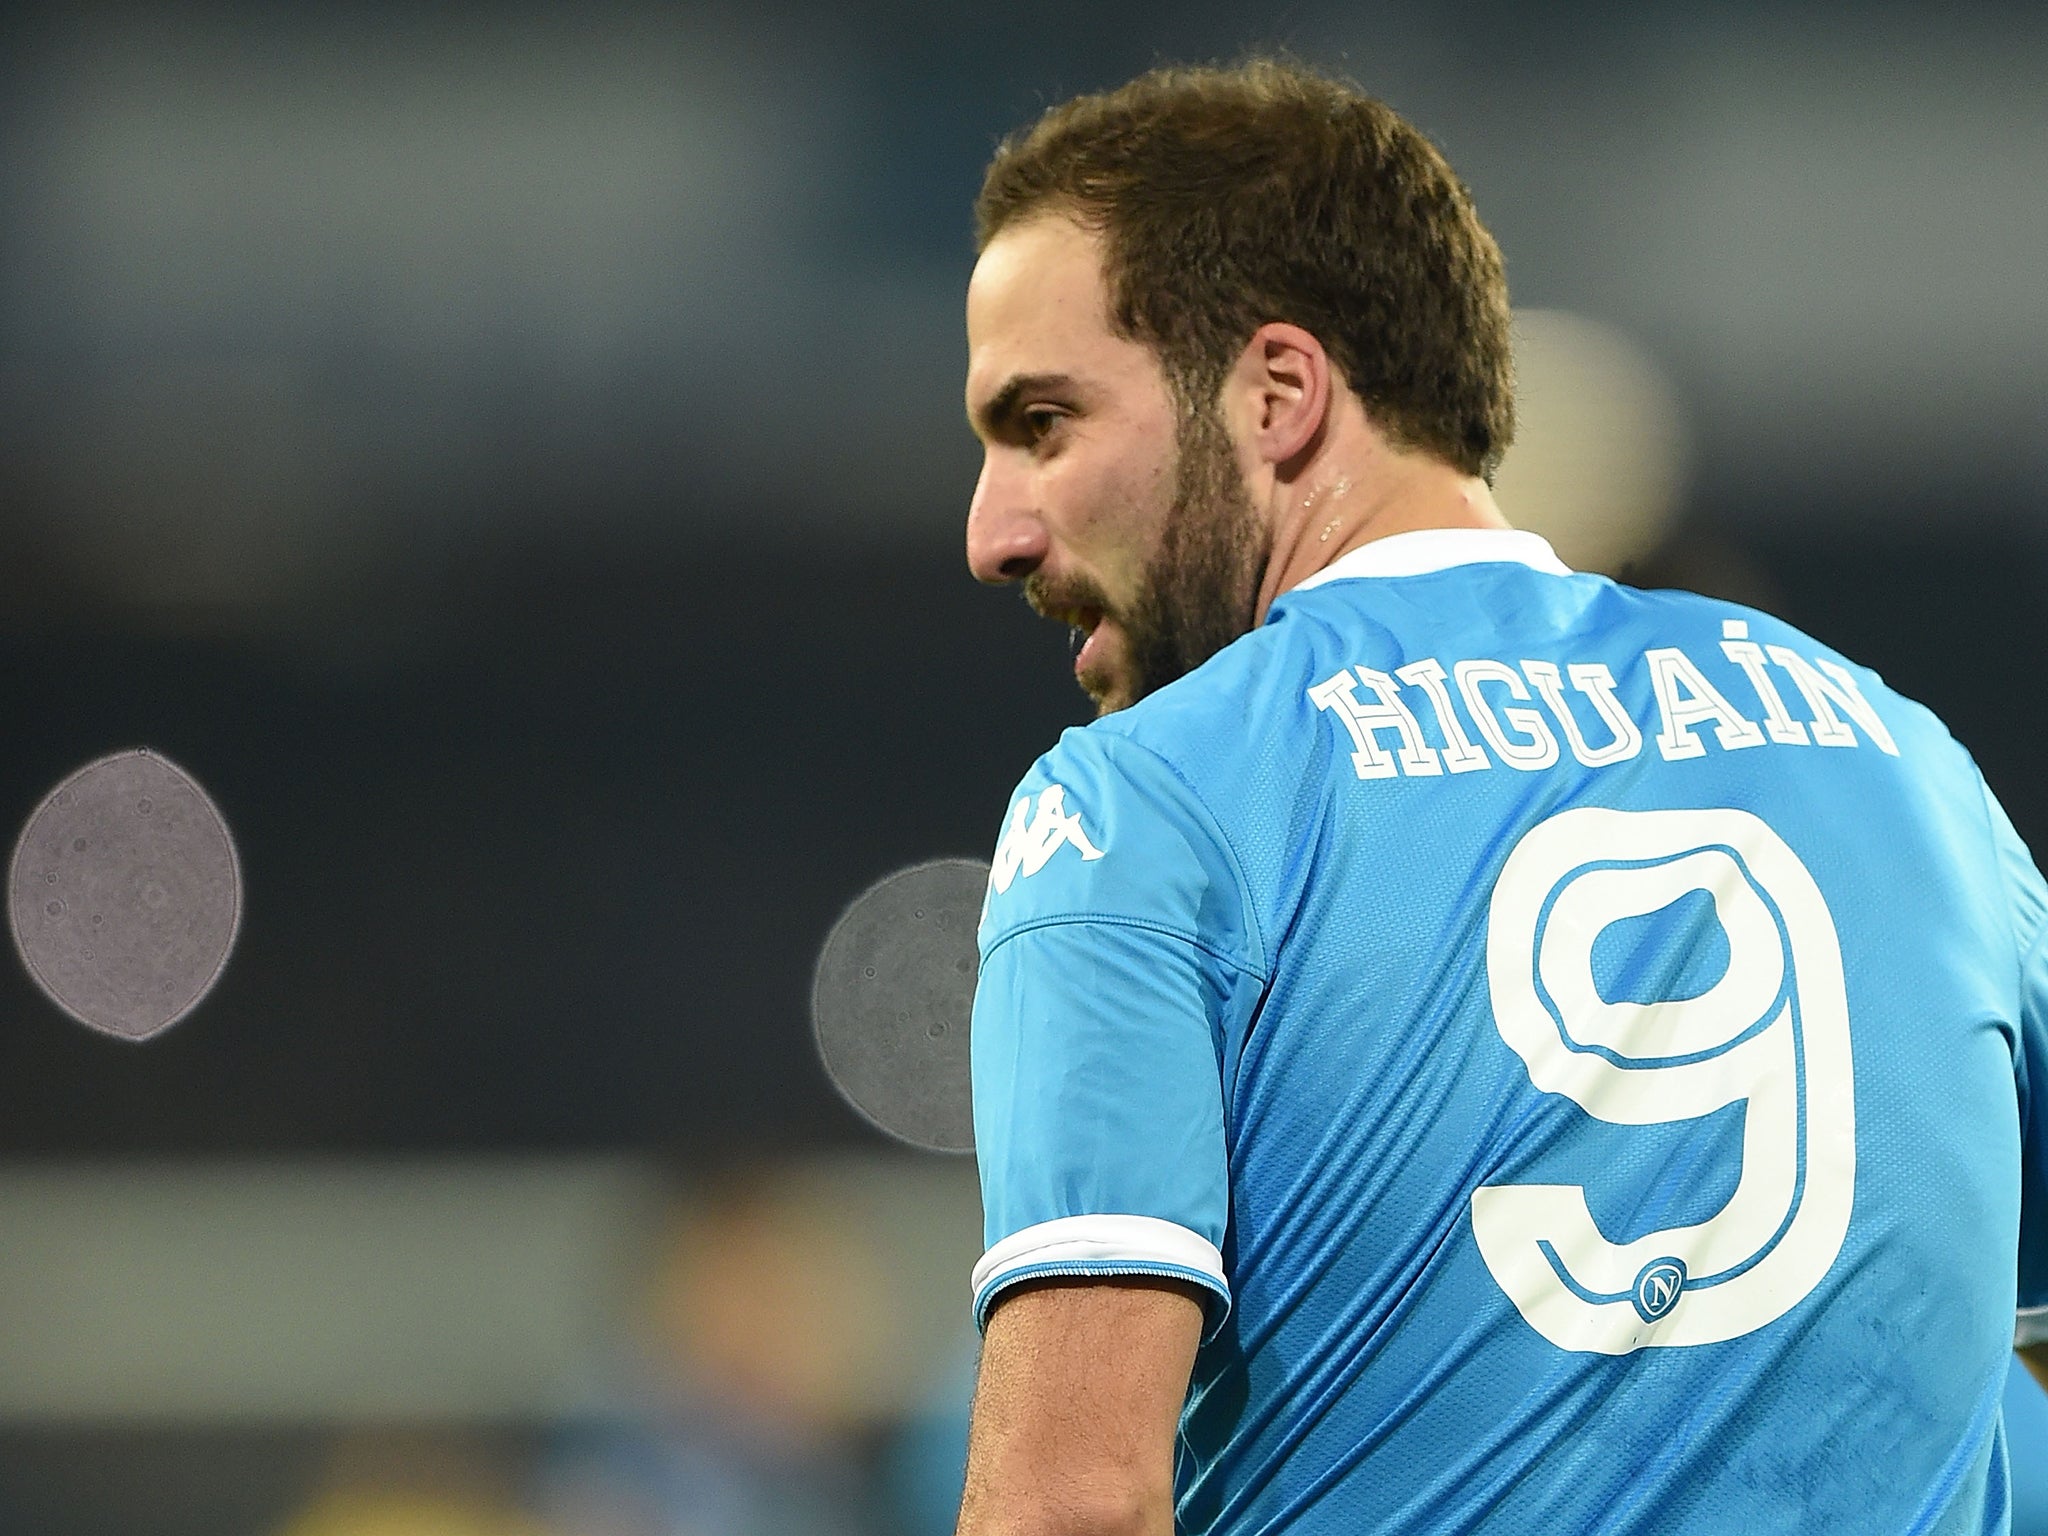 Napoli striker Gonzalo Higuain has been linked with a move to Arsenal